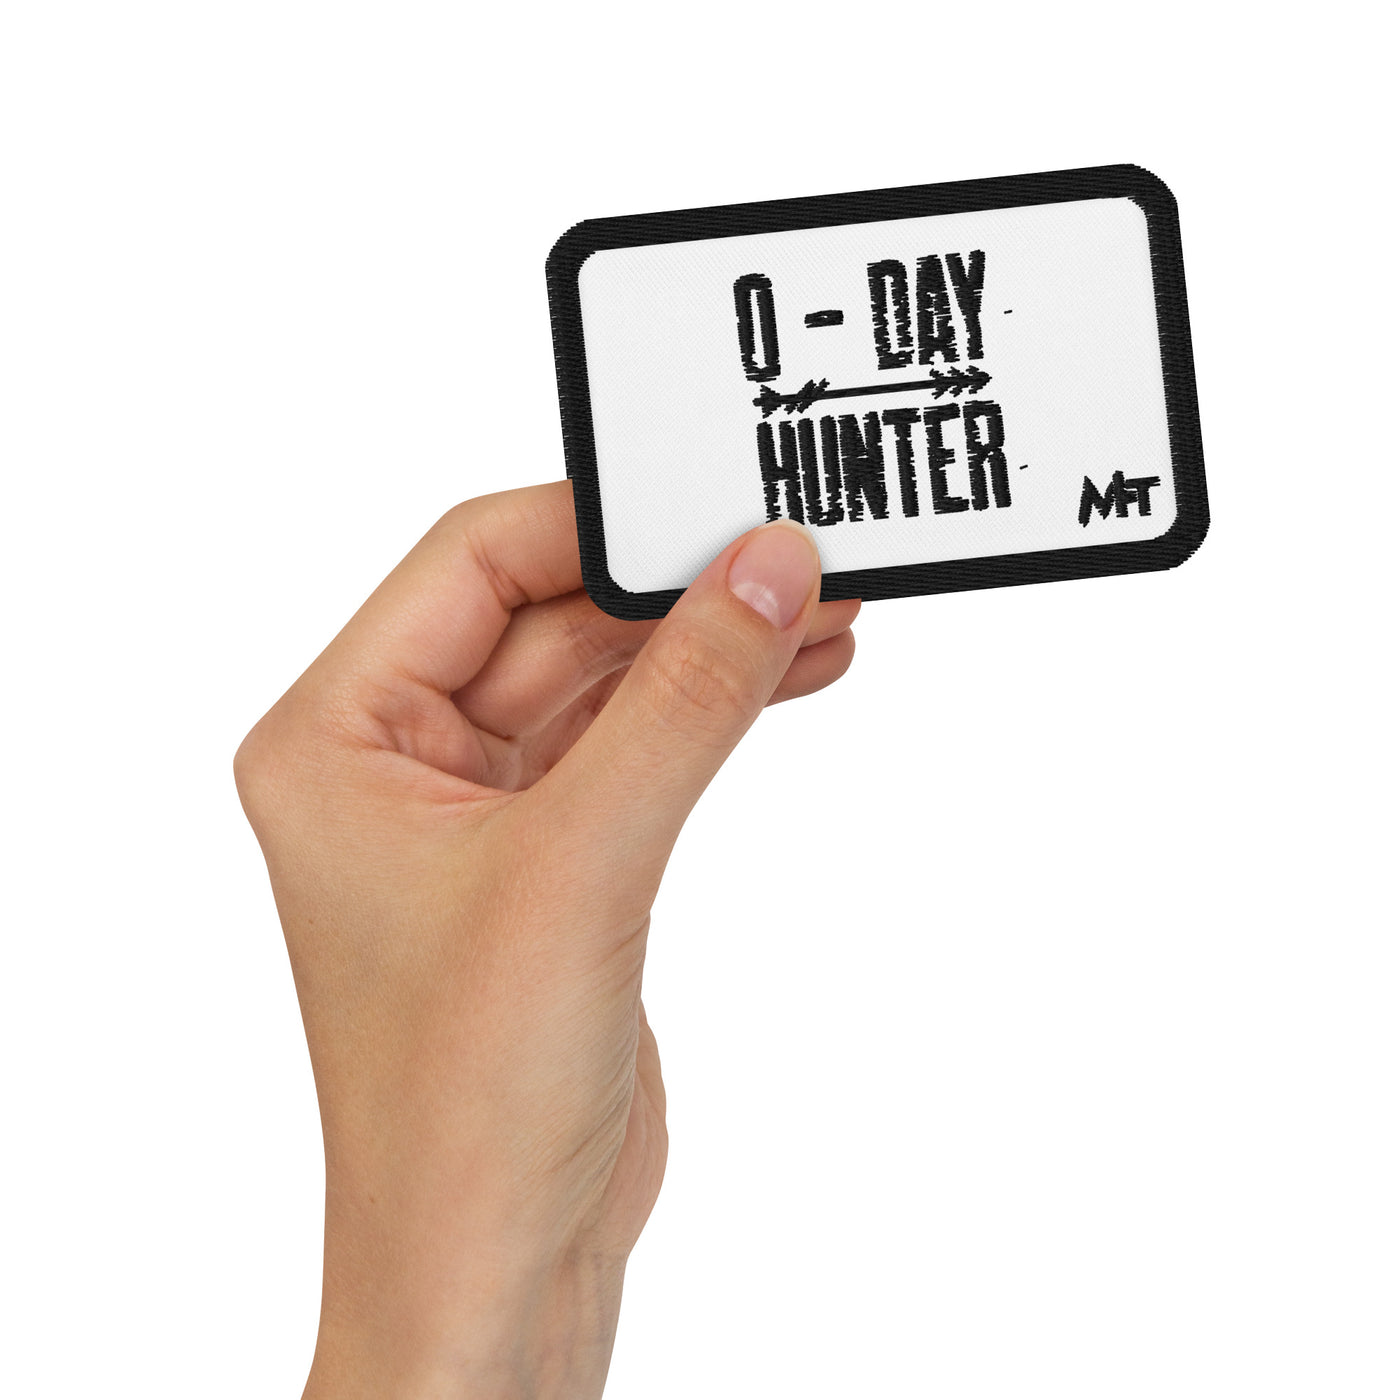 0-day Hunter V8 - Embroidered patches